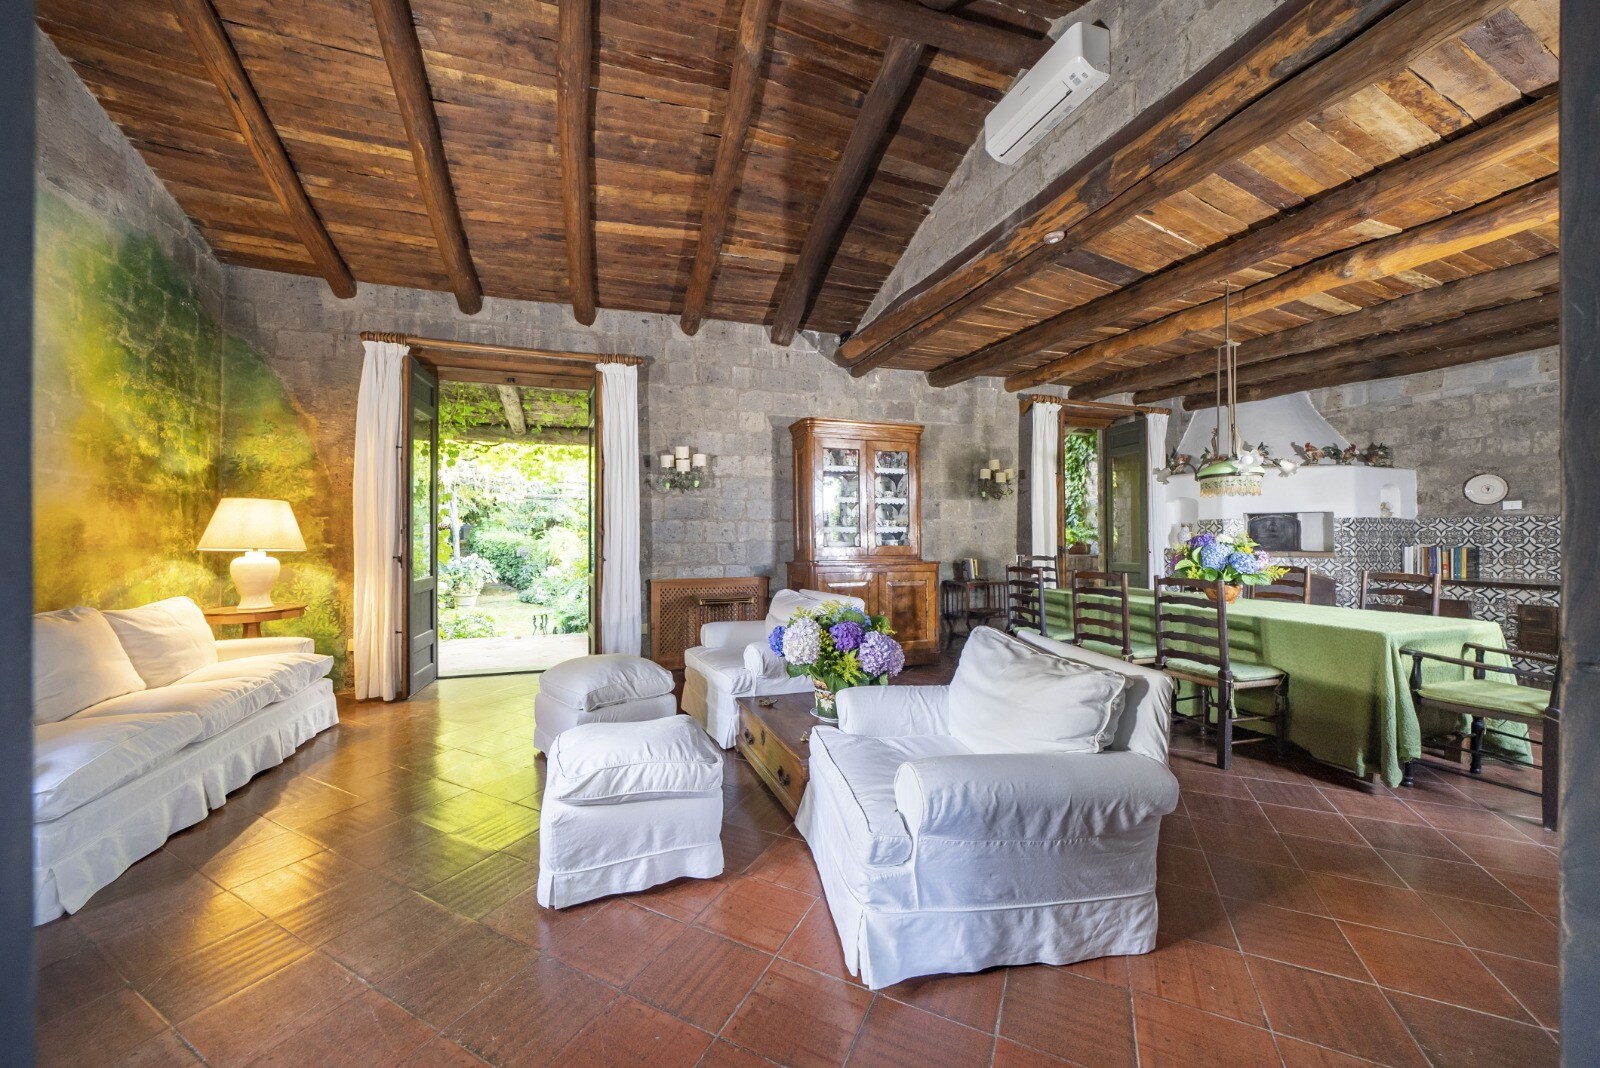 Property Image 2 - Villa Mellicata. Historical Villa with Magical Gardens and Heated Pool